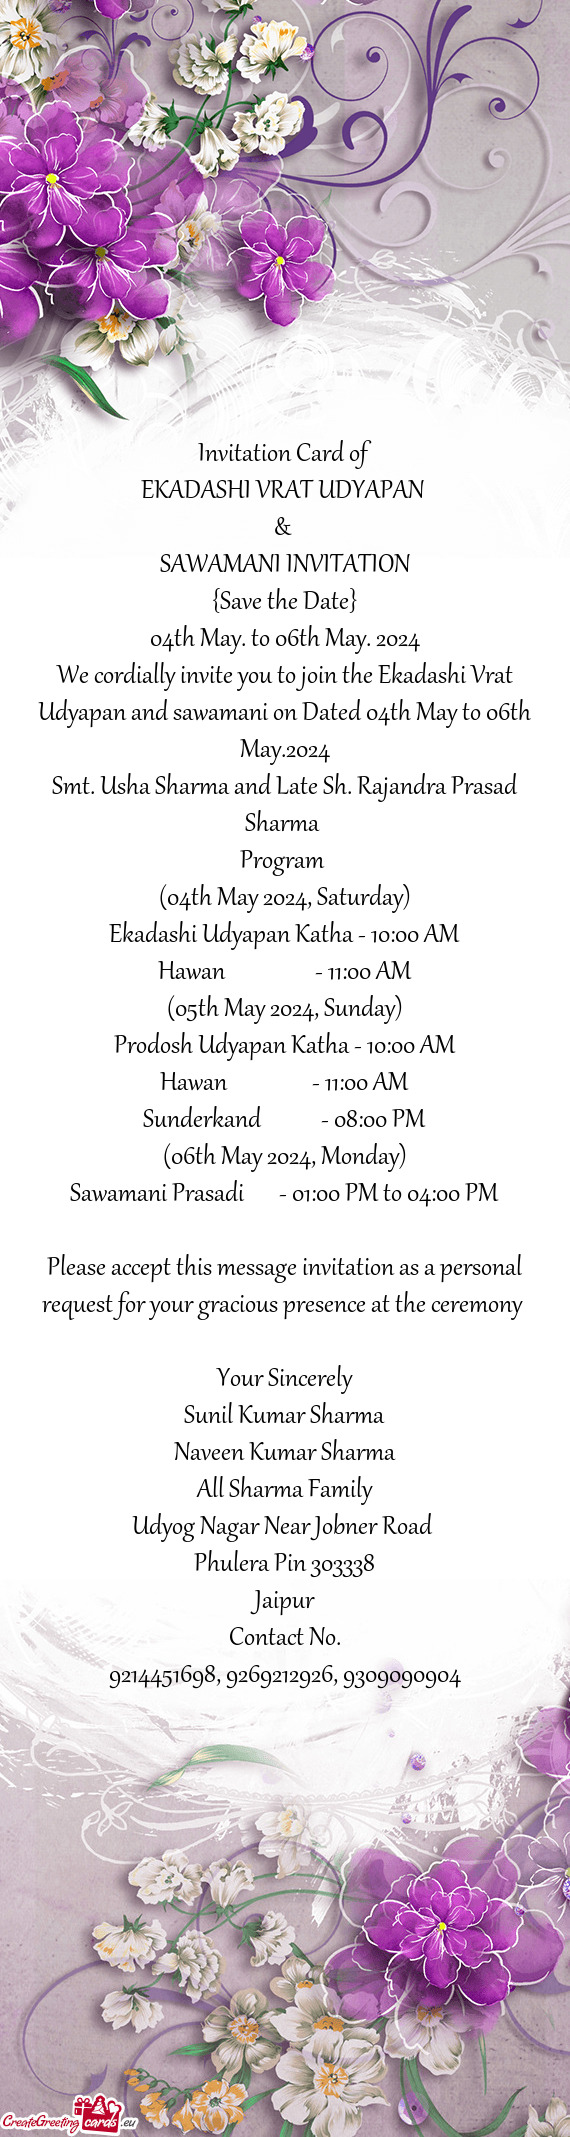 We cordially invite you to join the Ekadashi Vrat Udyapan and sawamani on Dated 04th May to 06th May